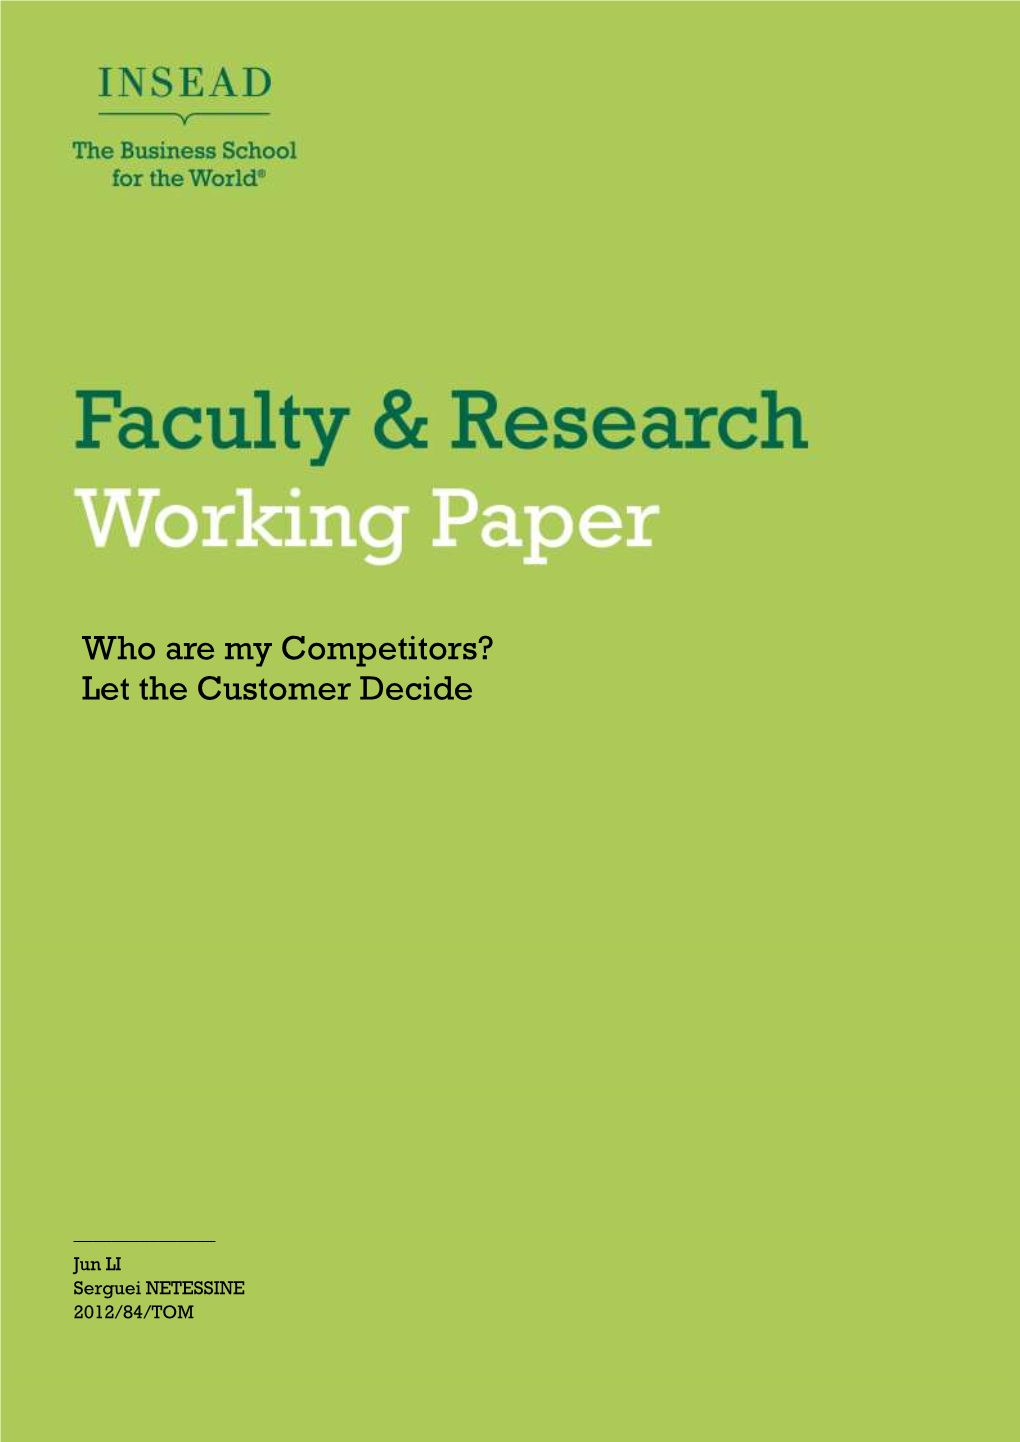 Insead Faculty & Research Working Paper